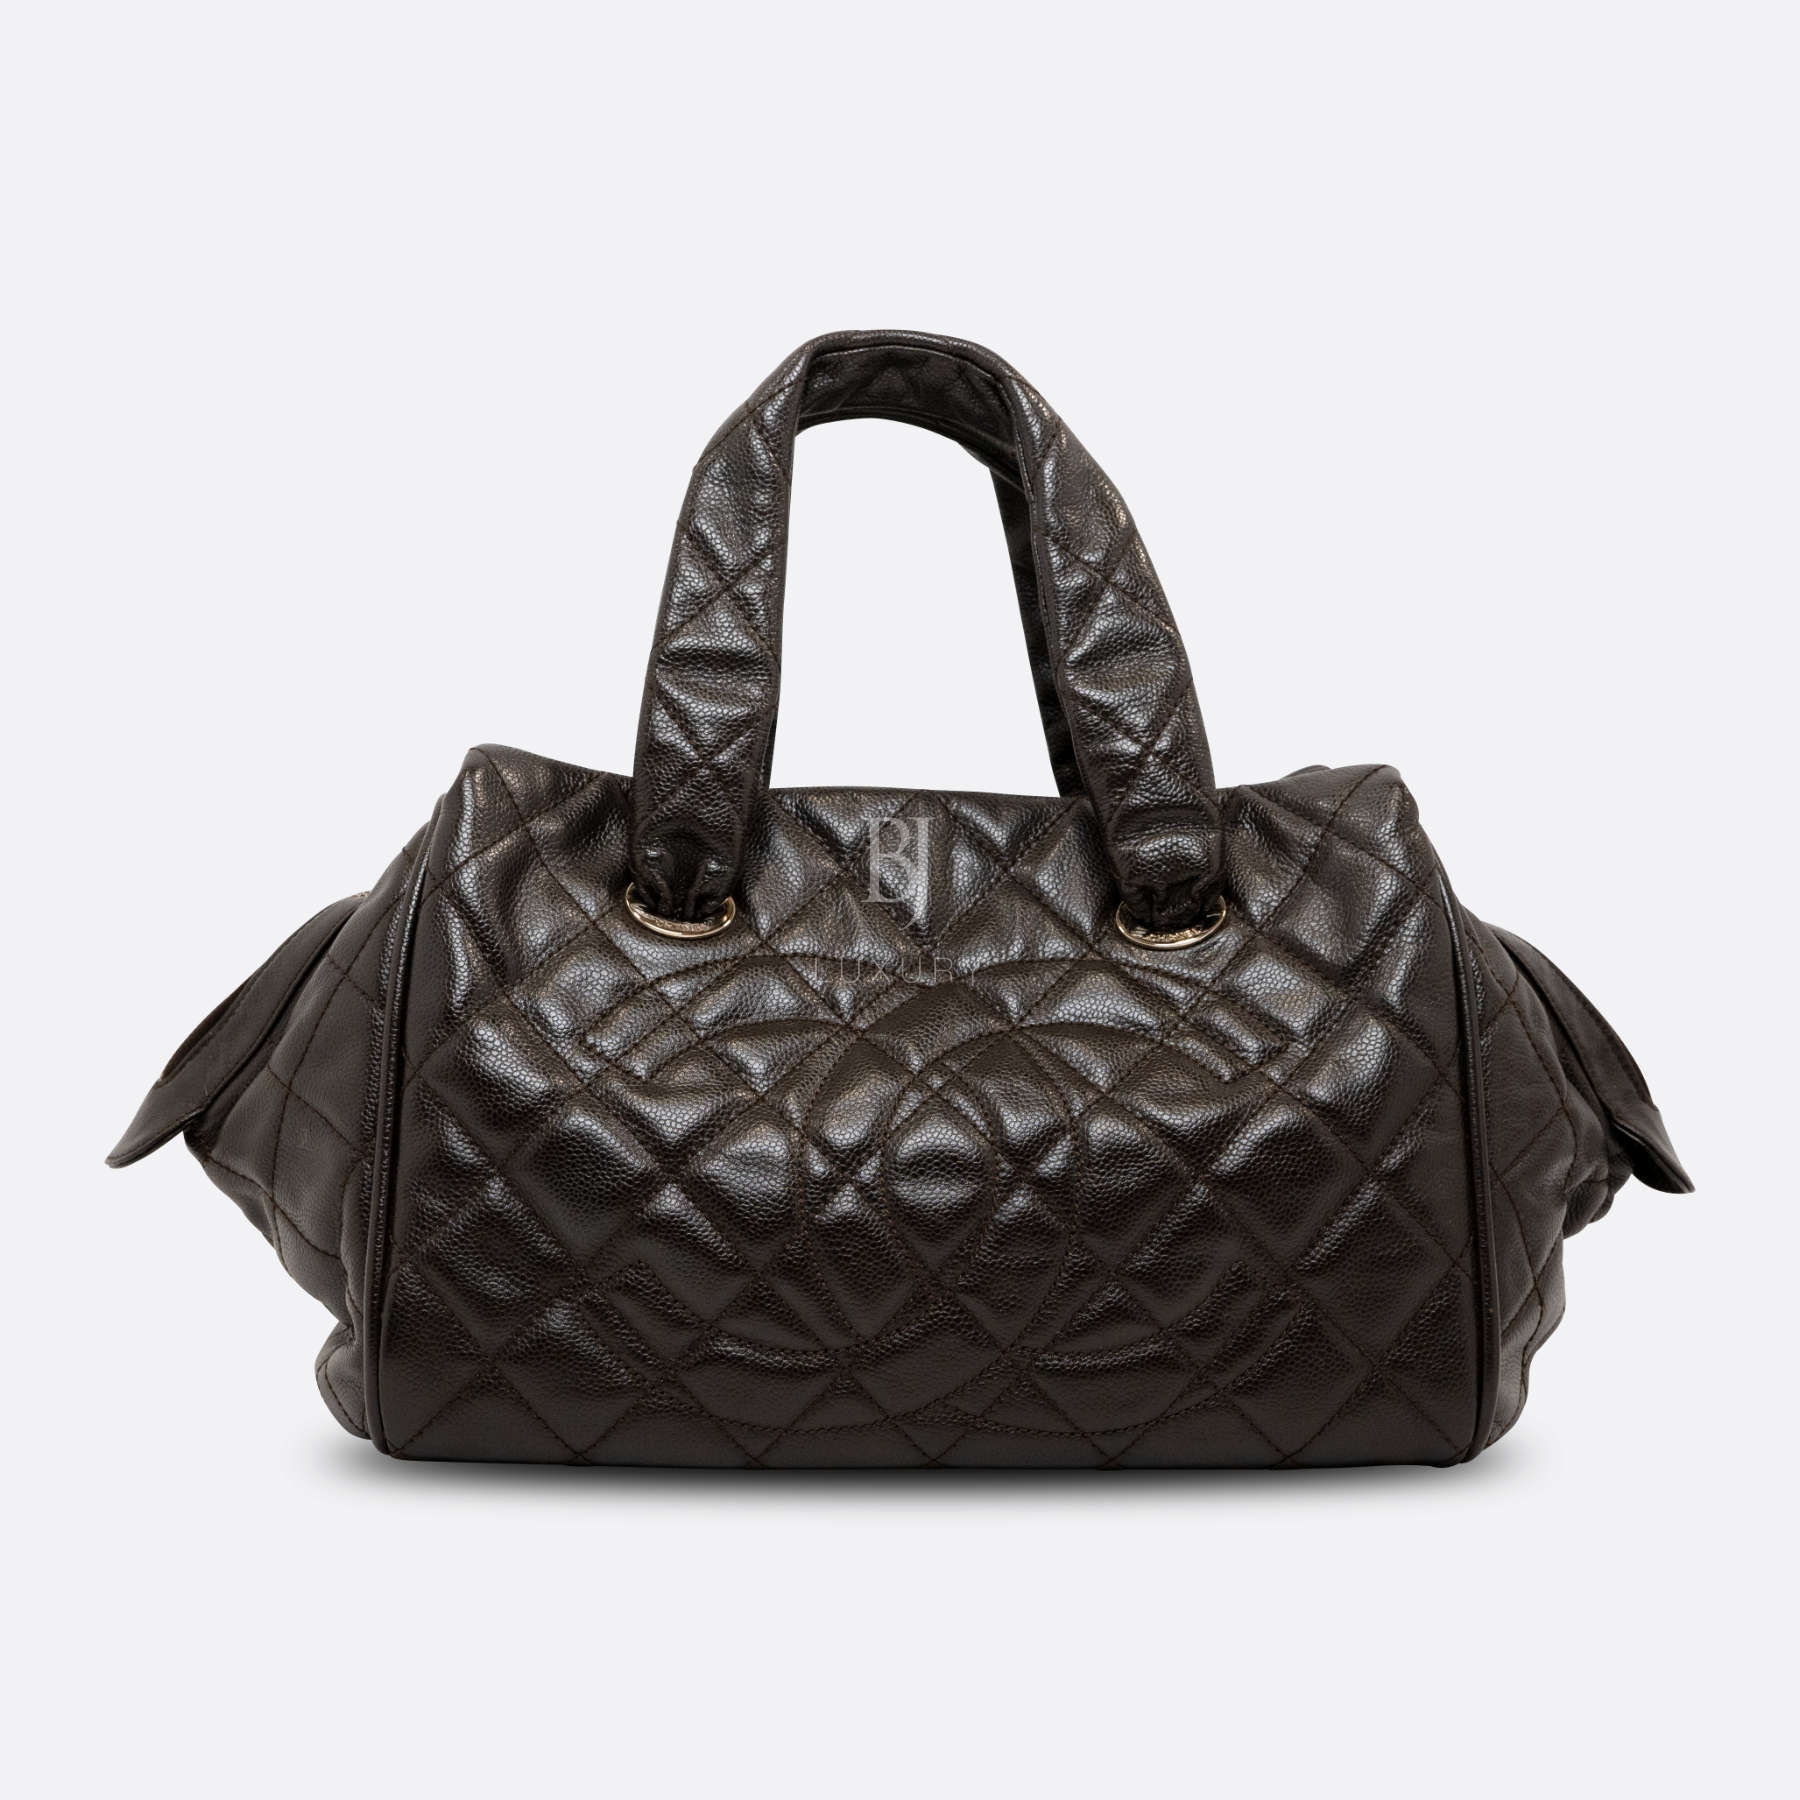 CHANEL-TOTE-LARGE-BROWN-CAVIAR-4284 front.jpg